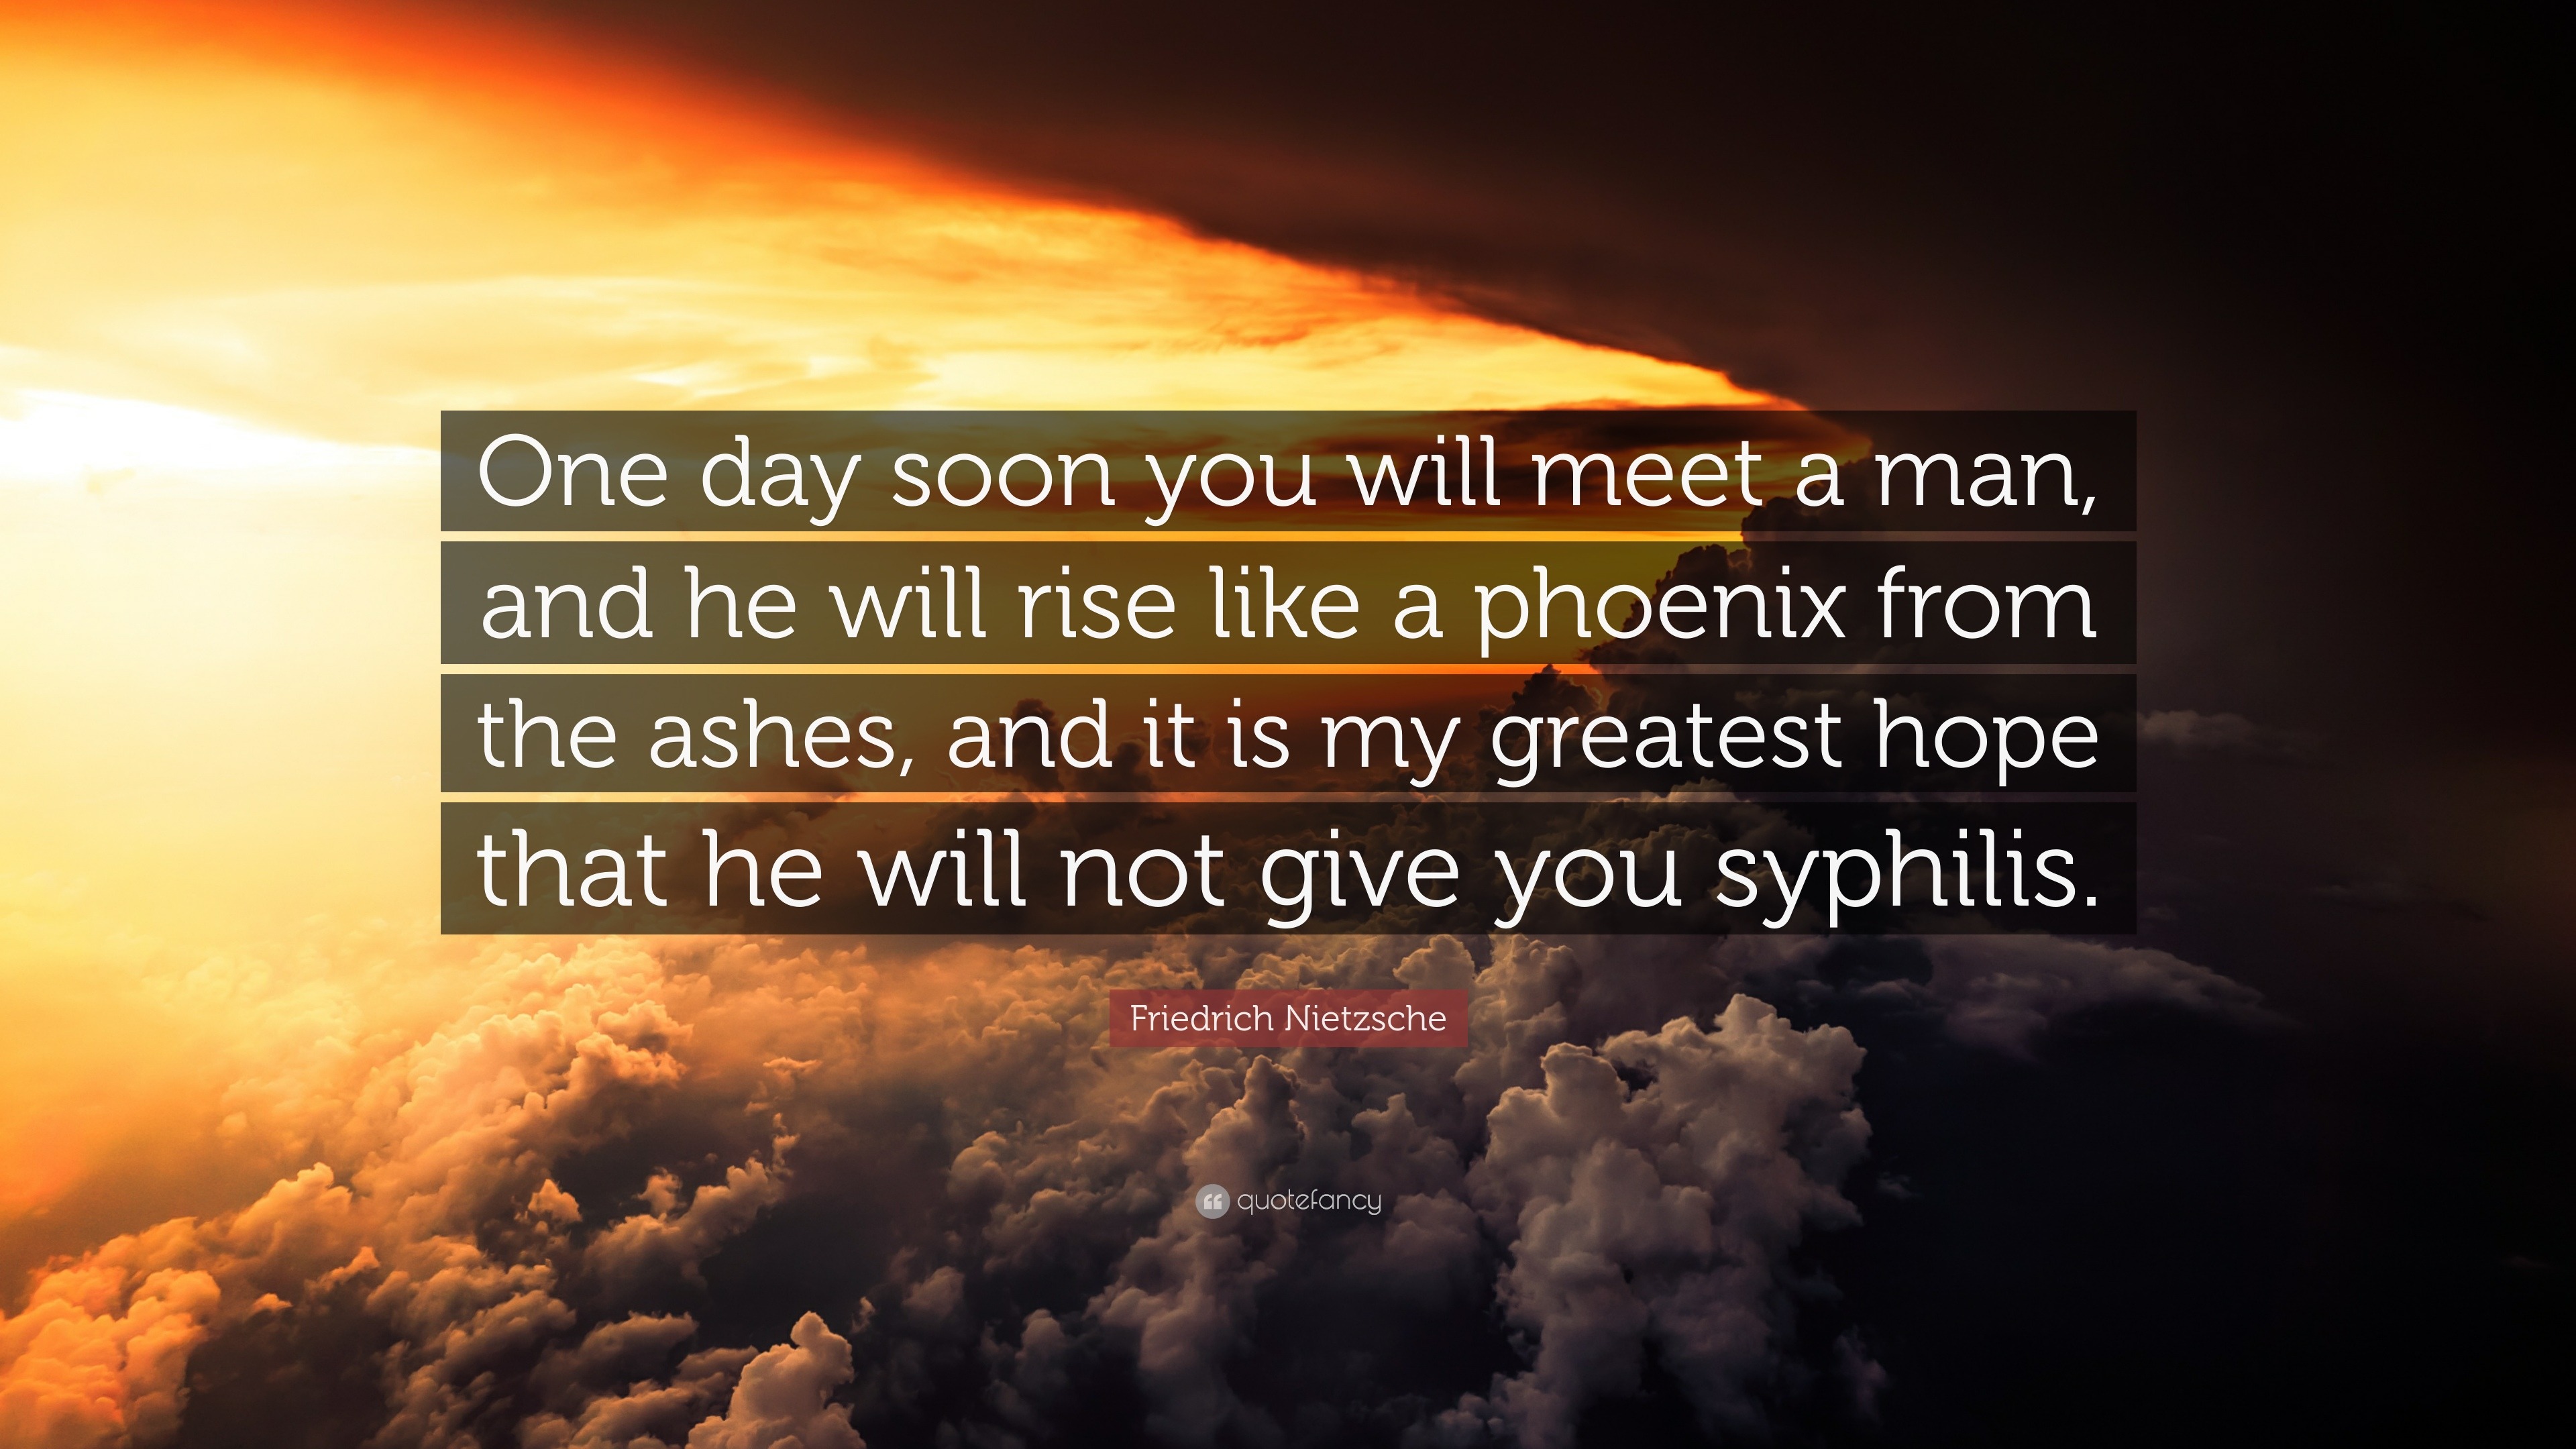 Friedrich Nietzsche Quote One Day Soon You Will Meet A Man And He Will Rise Like A Phoenix From The Ashes And It Is My Greatest Hope That He Wil